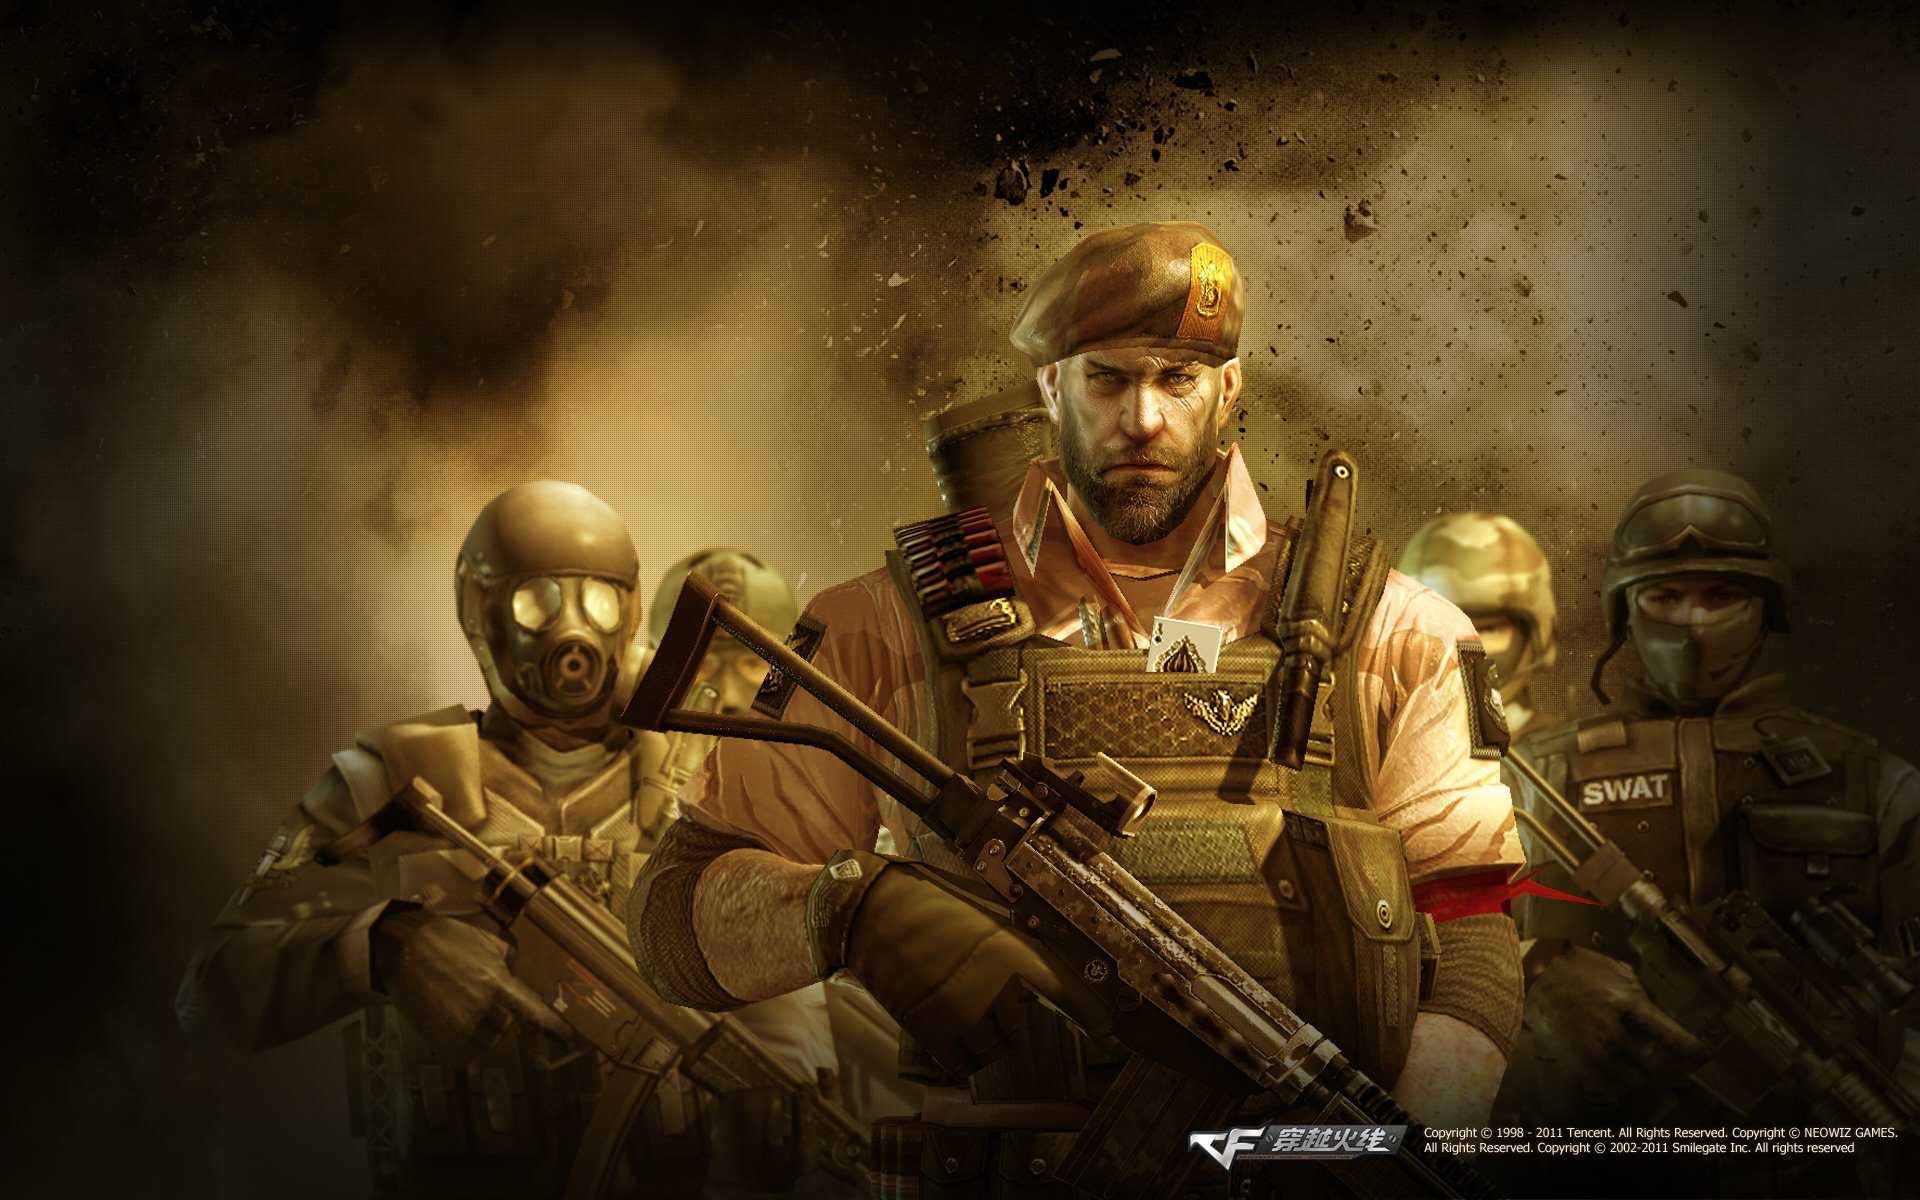 crossfire, Online, Fps, Shooter, Fighting, Action, Military, Tactical, Soldier, 1cfire, Stealth, Weapon, Gun Wallpaper